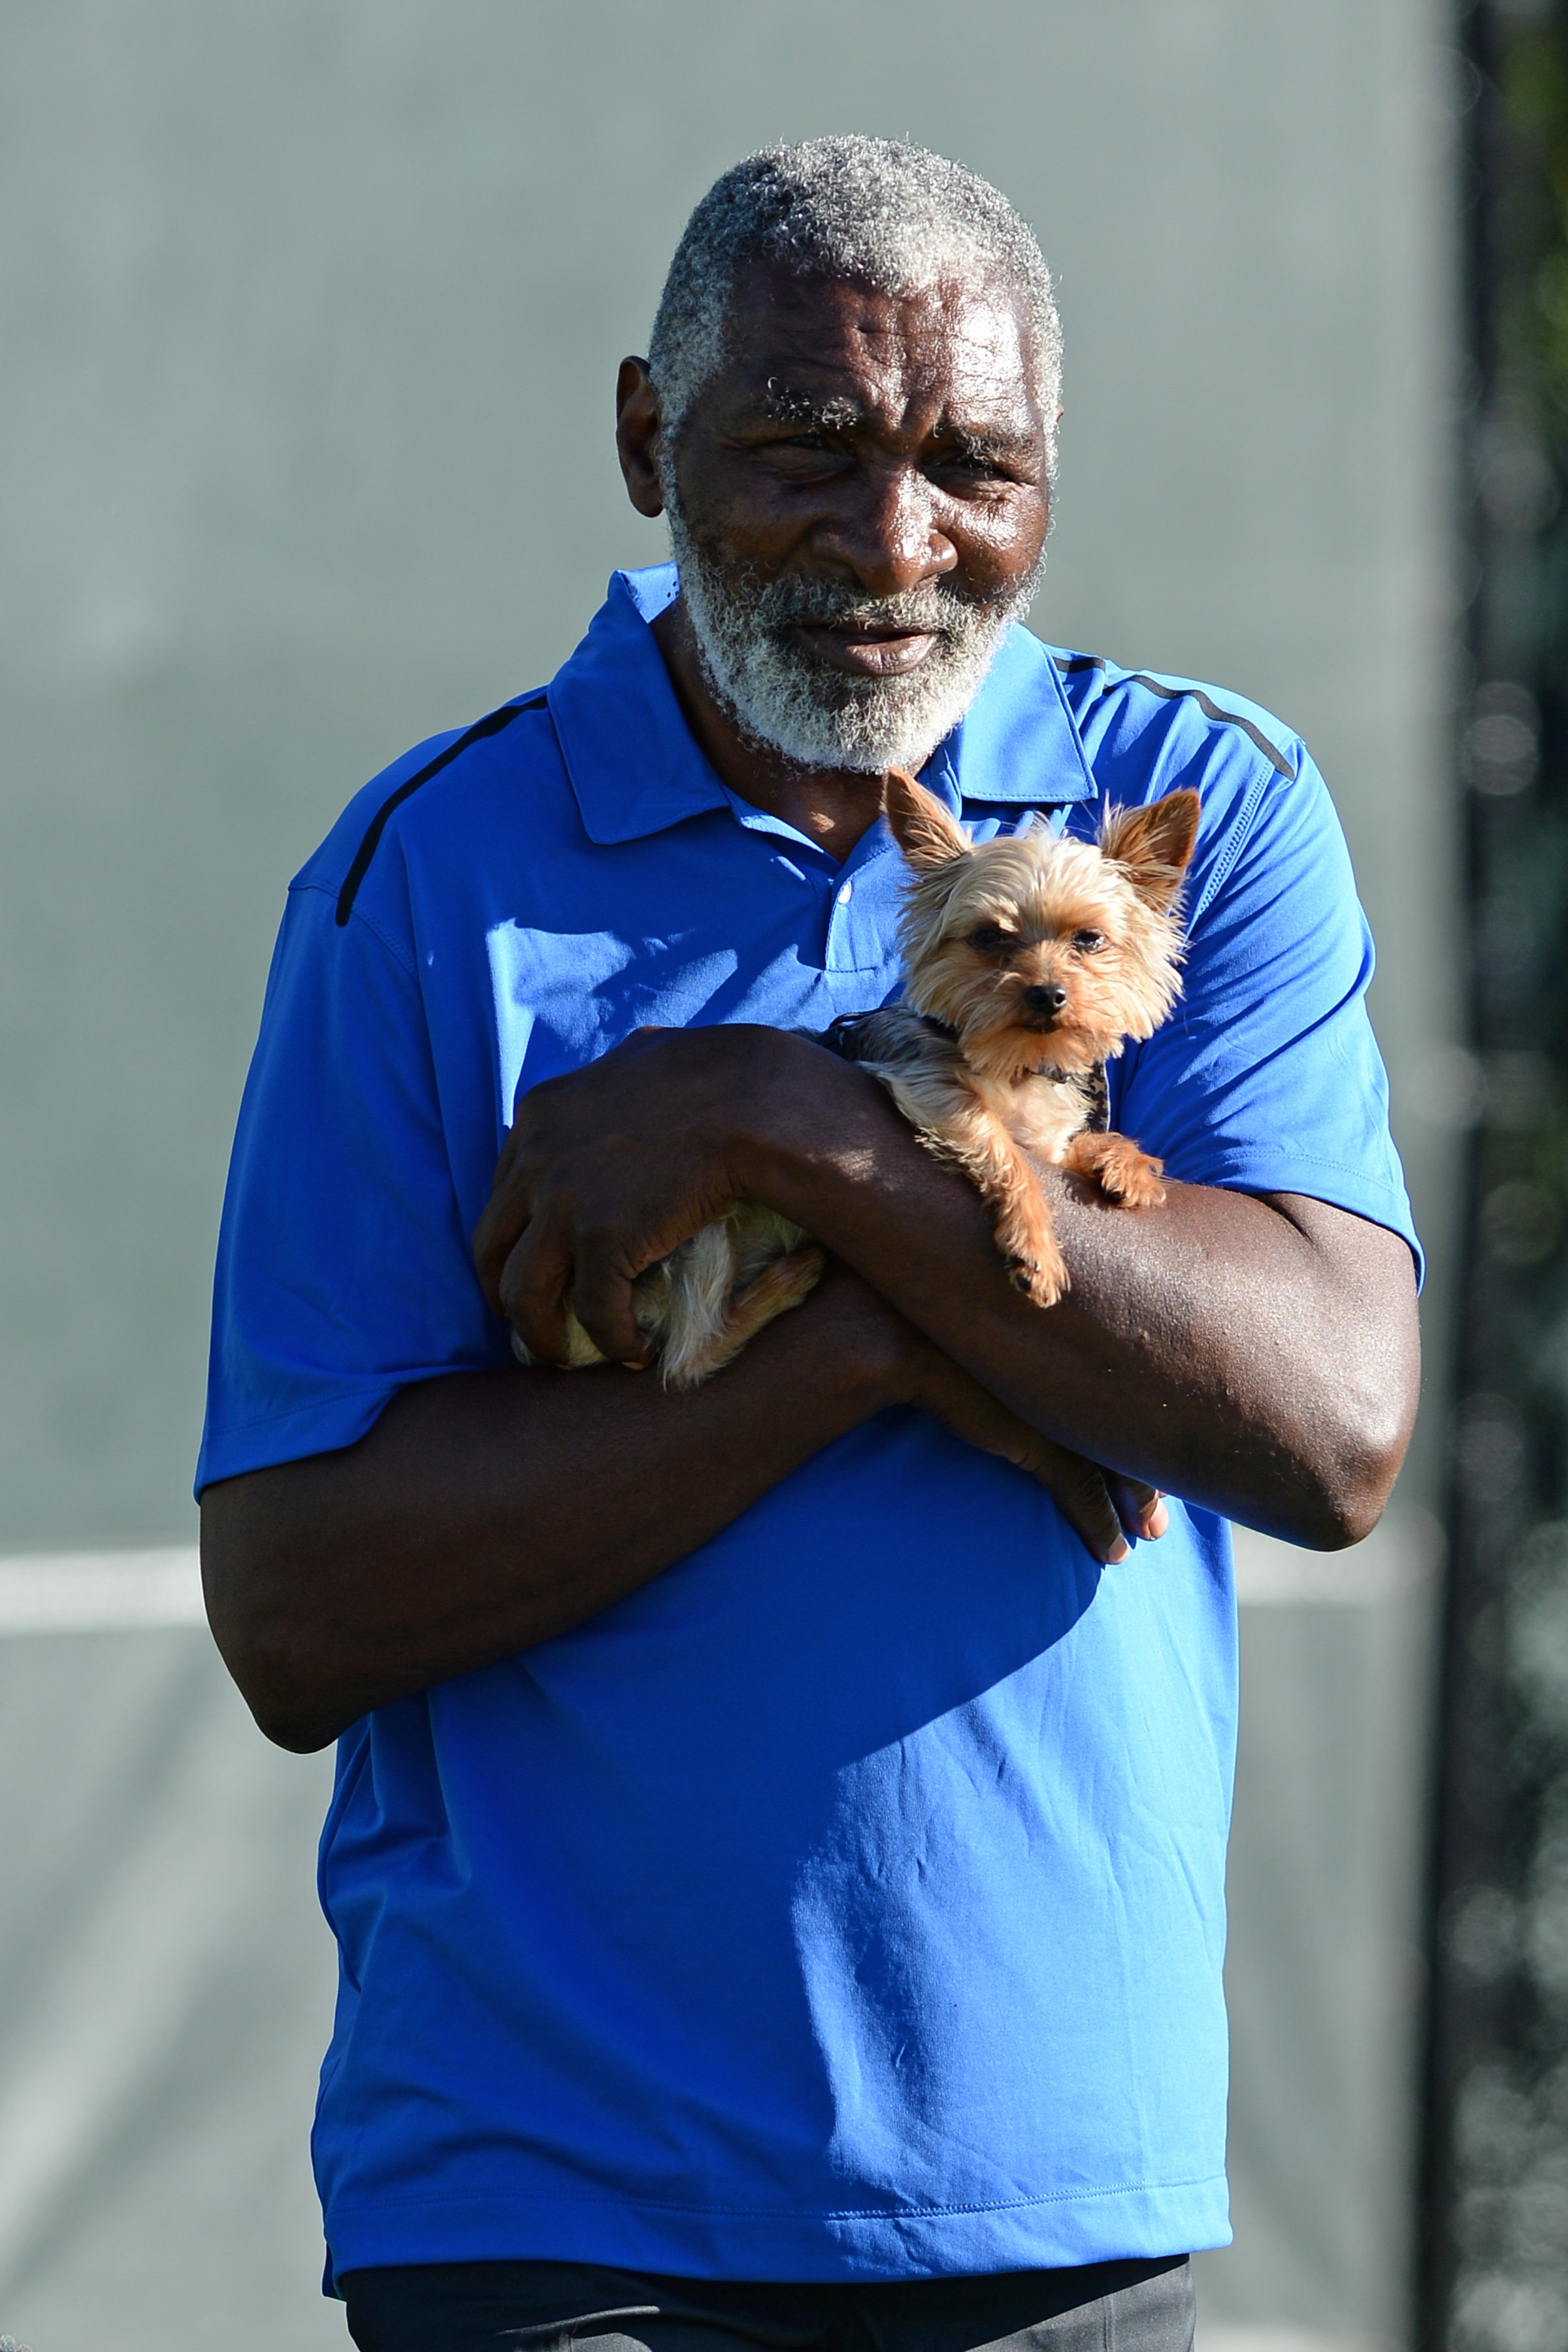 Richard Williams is pictured at the Sony Open Tennis at Crandon Park Tennis Center on March 25, 2014, in Key Biscayne, Florida | Source: Getty Images